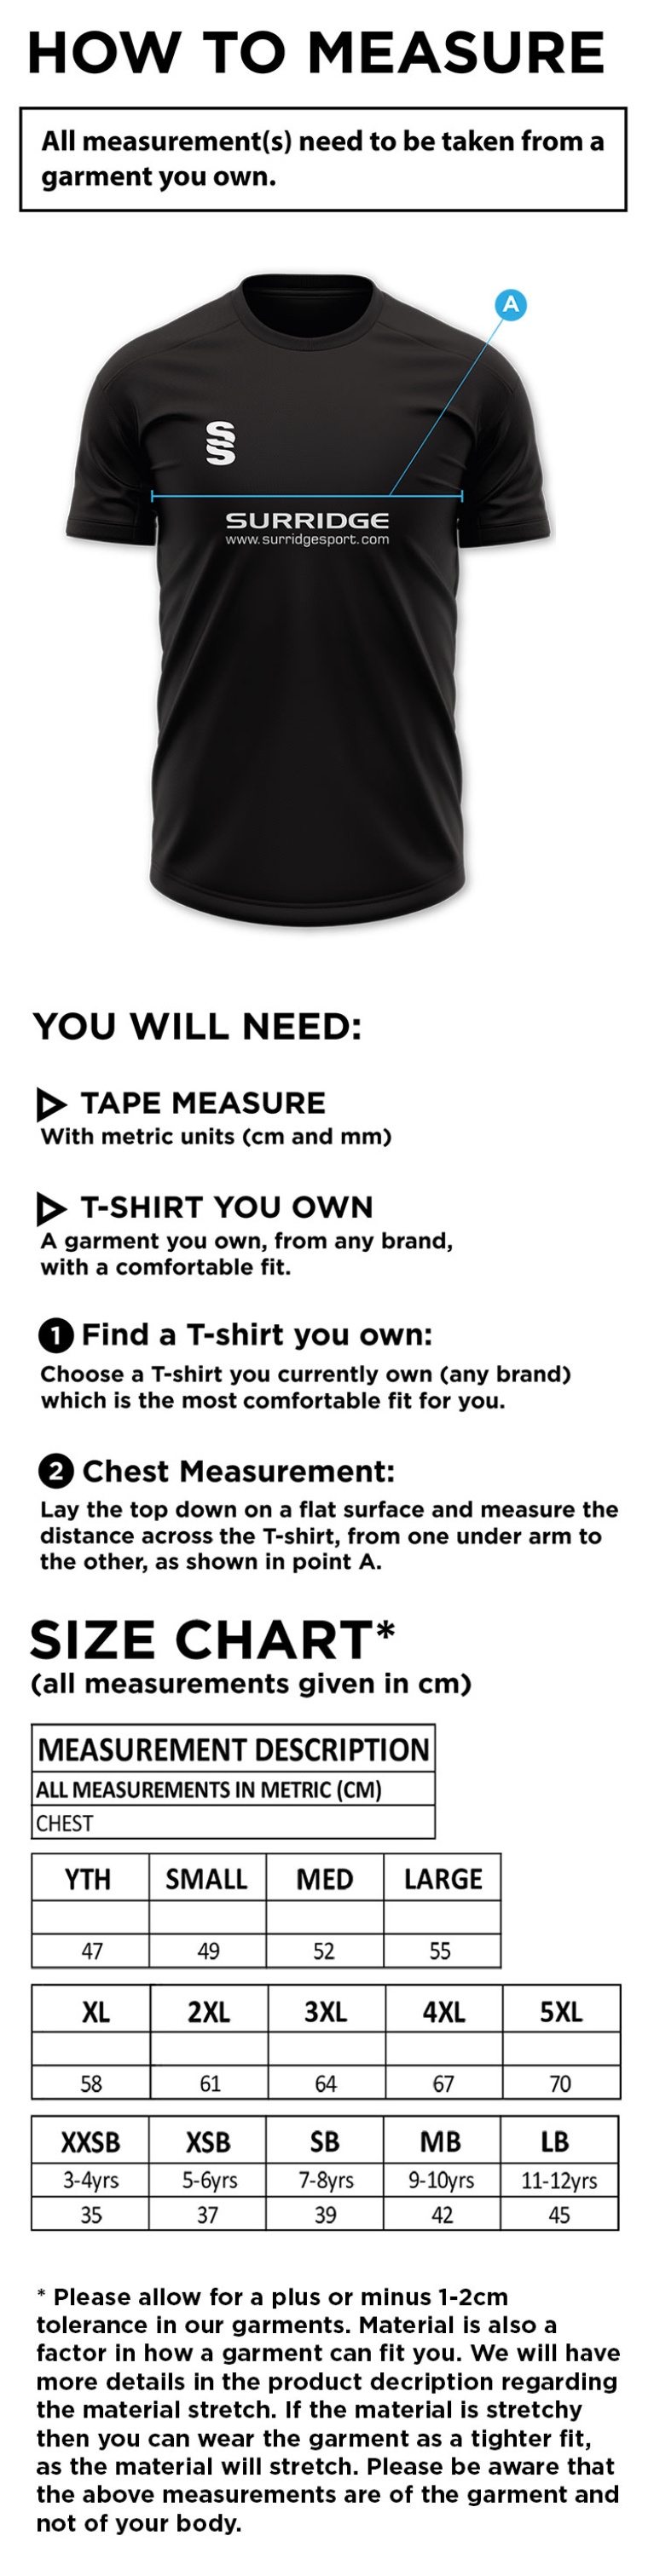 Youth's Dual Games Shirt : Red - Size Guide